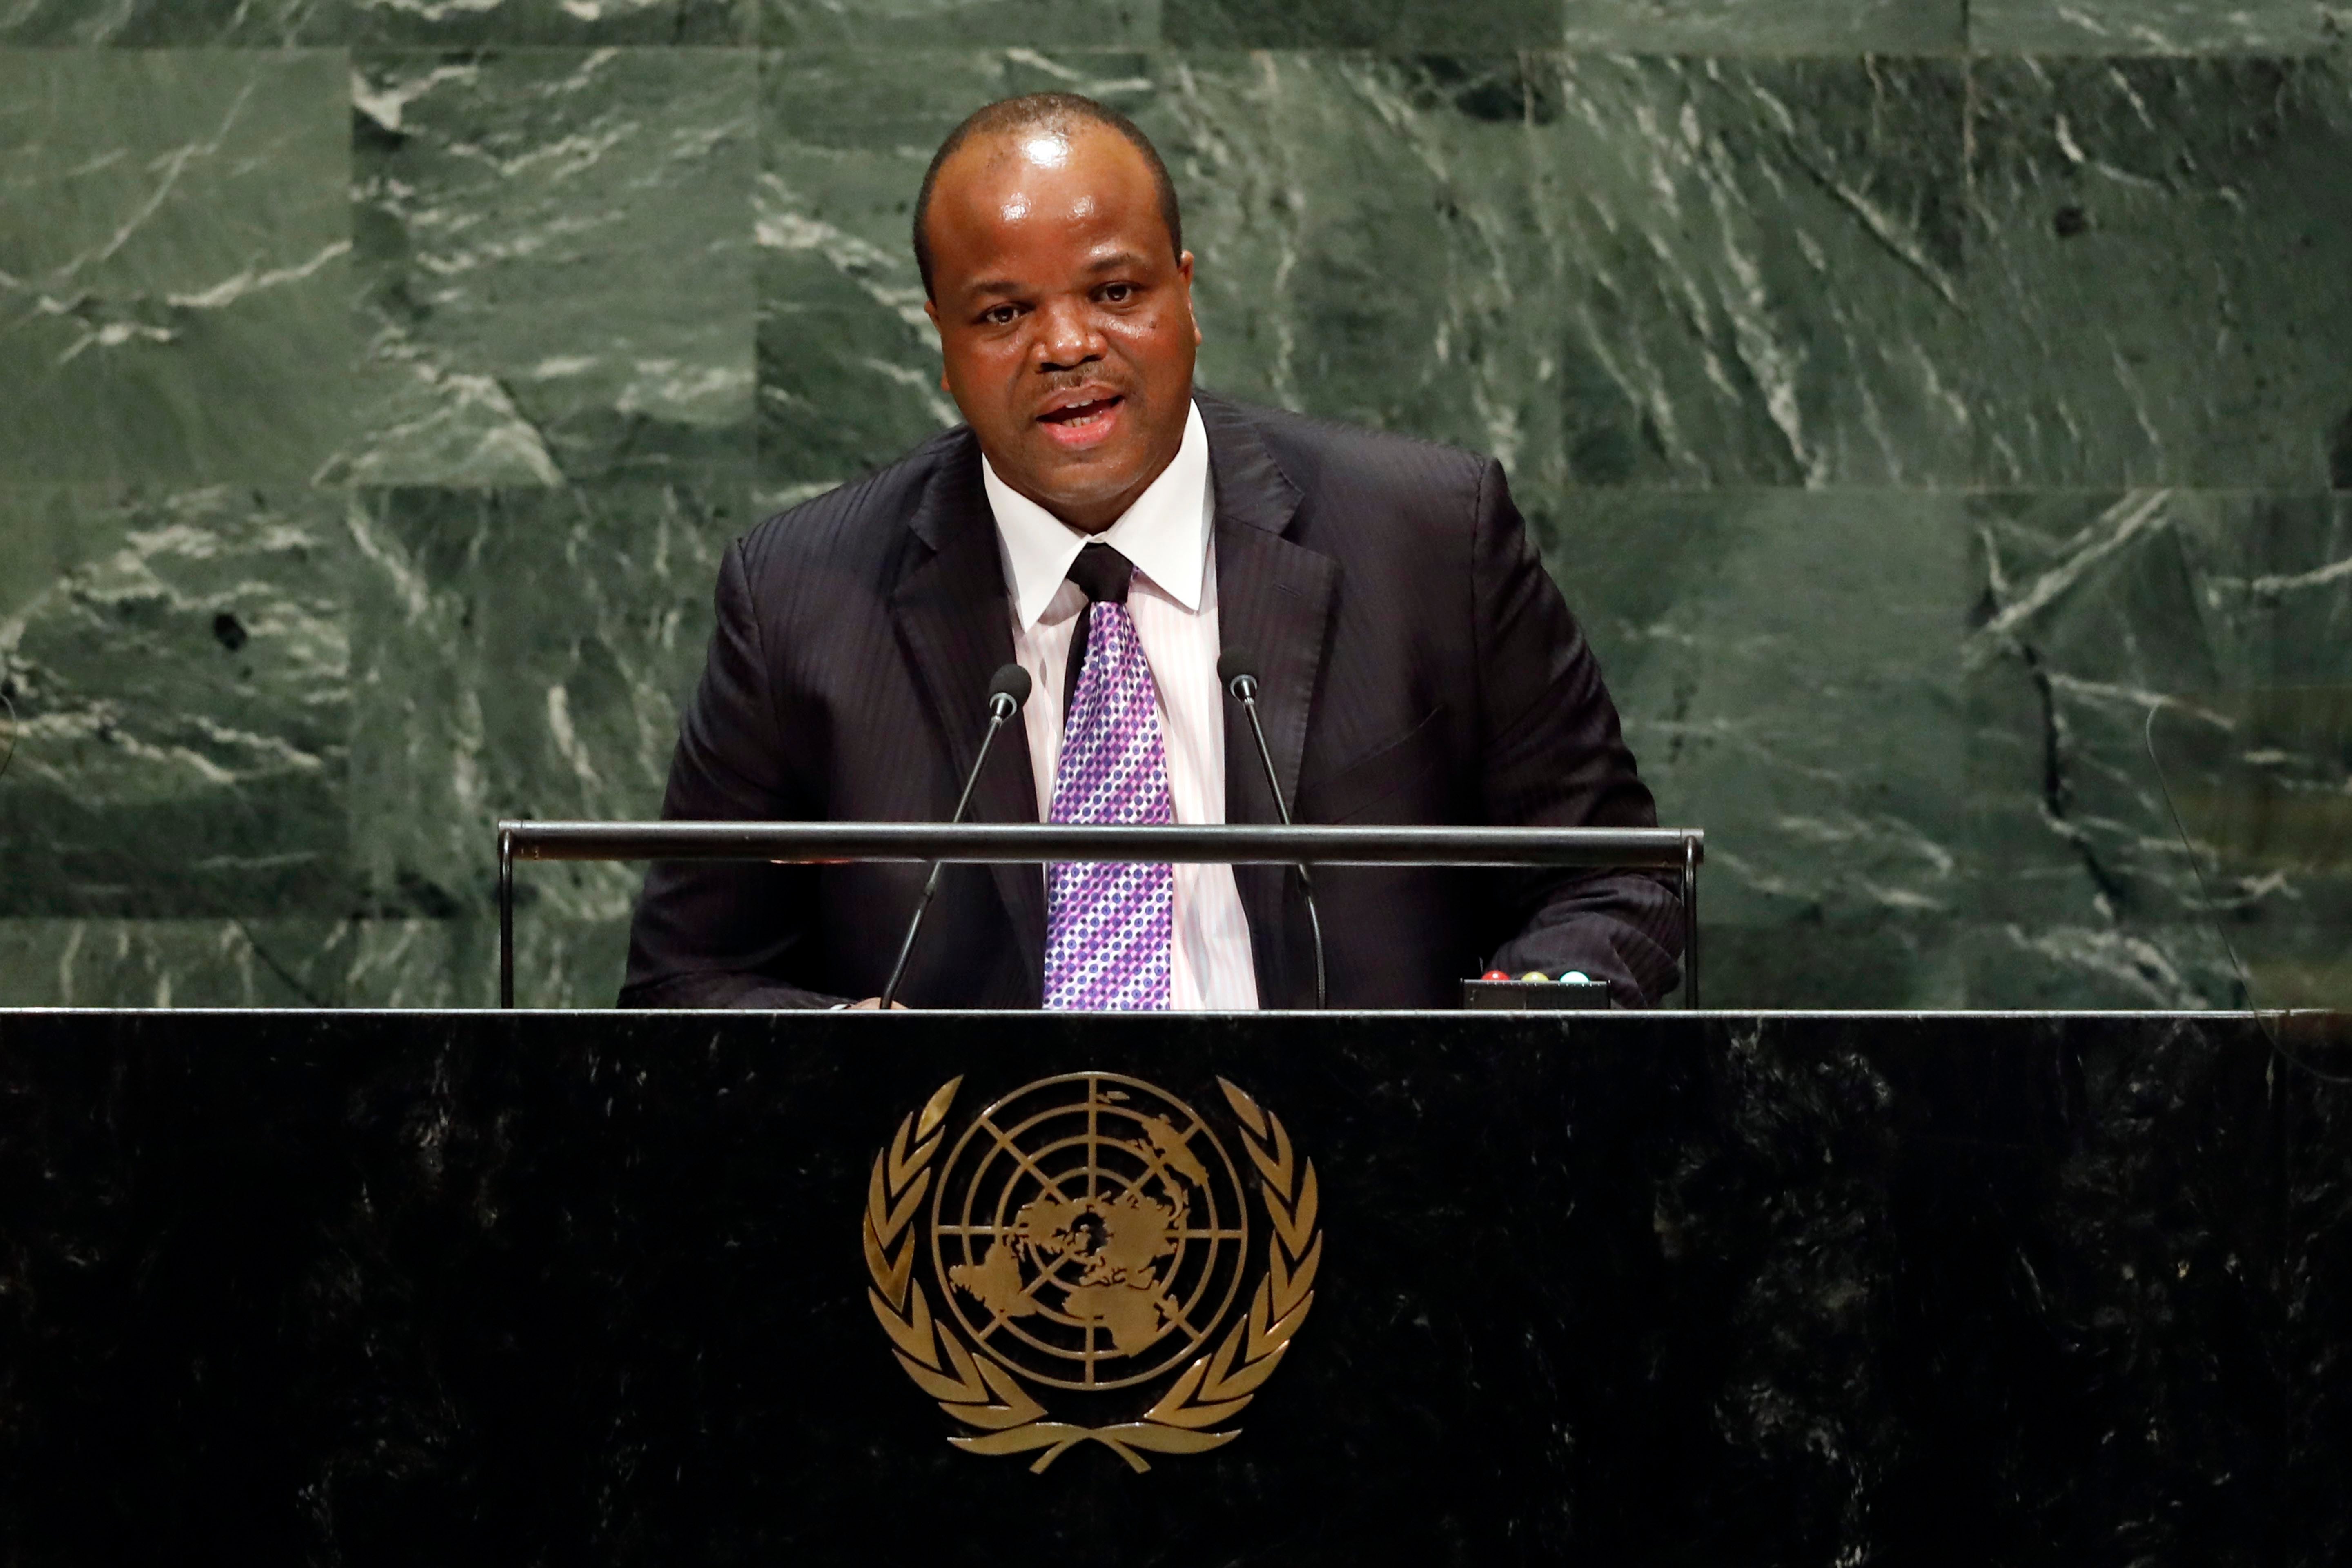 King Mswati III of Eswatini addresses the 74th session of the United Nations General Assembly, September 25, 2019.